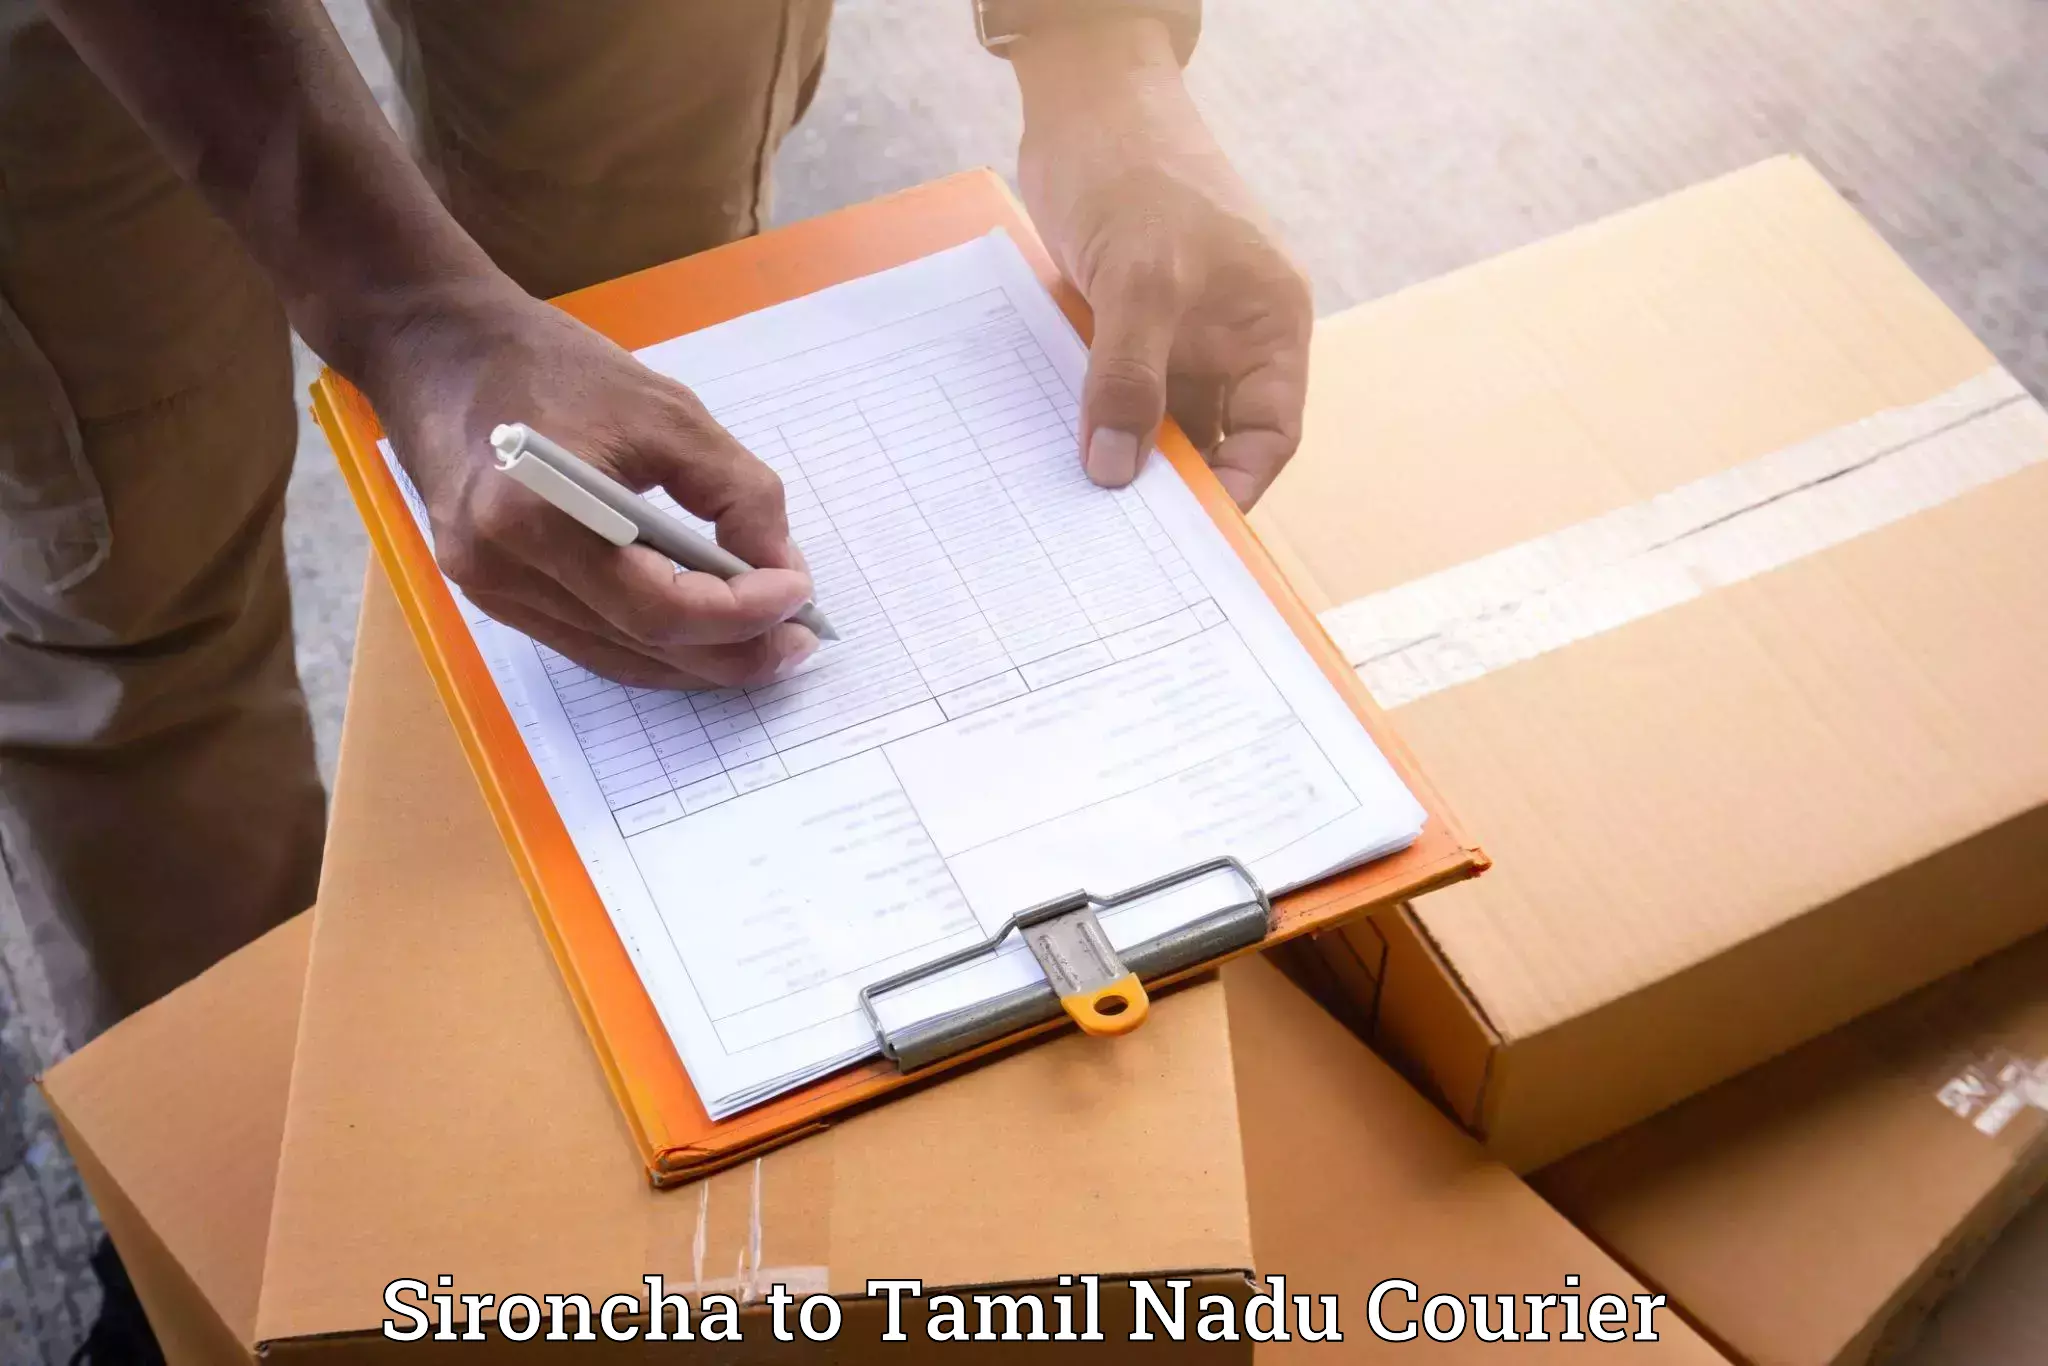 Home relocation experts Sironcha to Vellore Institute of Technology